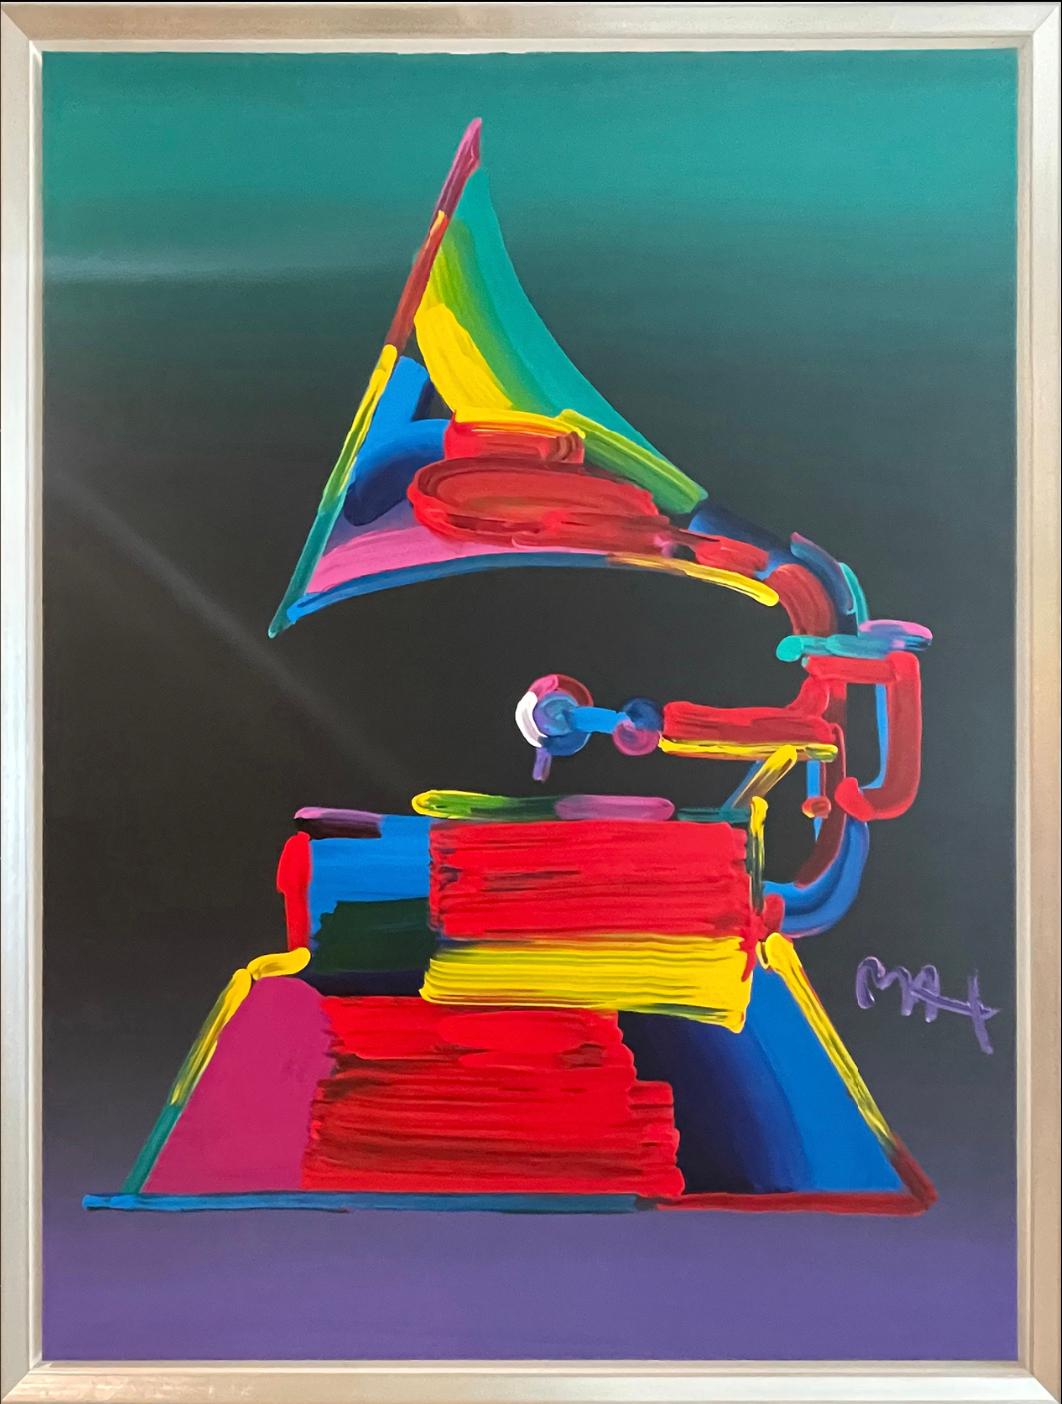 Grammy - Painting by Peter Max